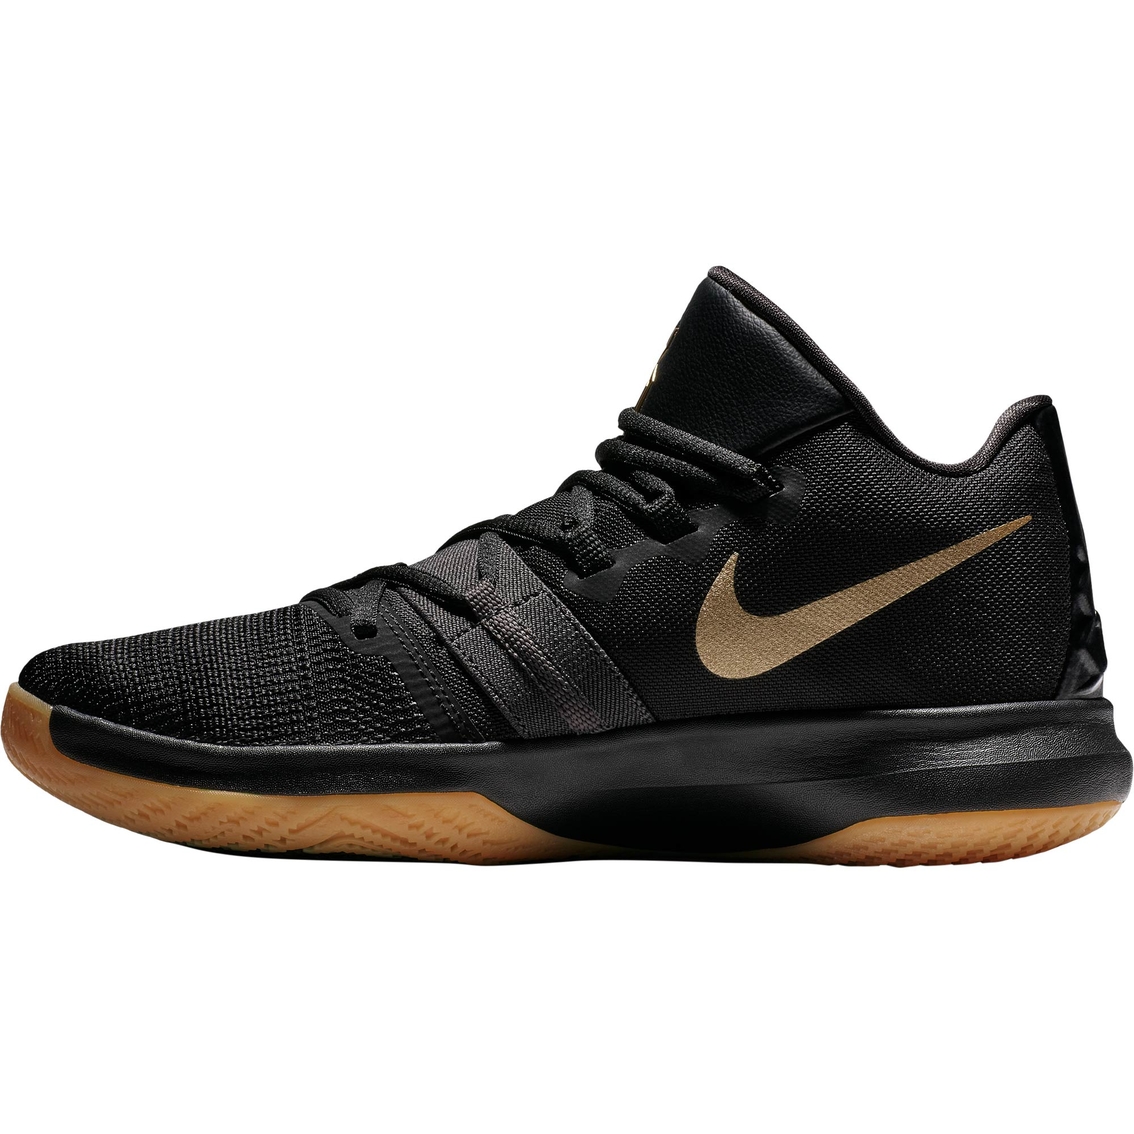 Nike Men's Kyrie Flytrap Basketball Shoes - Image 2 of 4